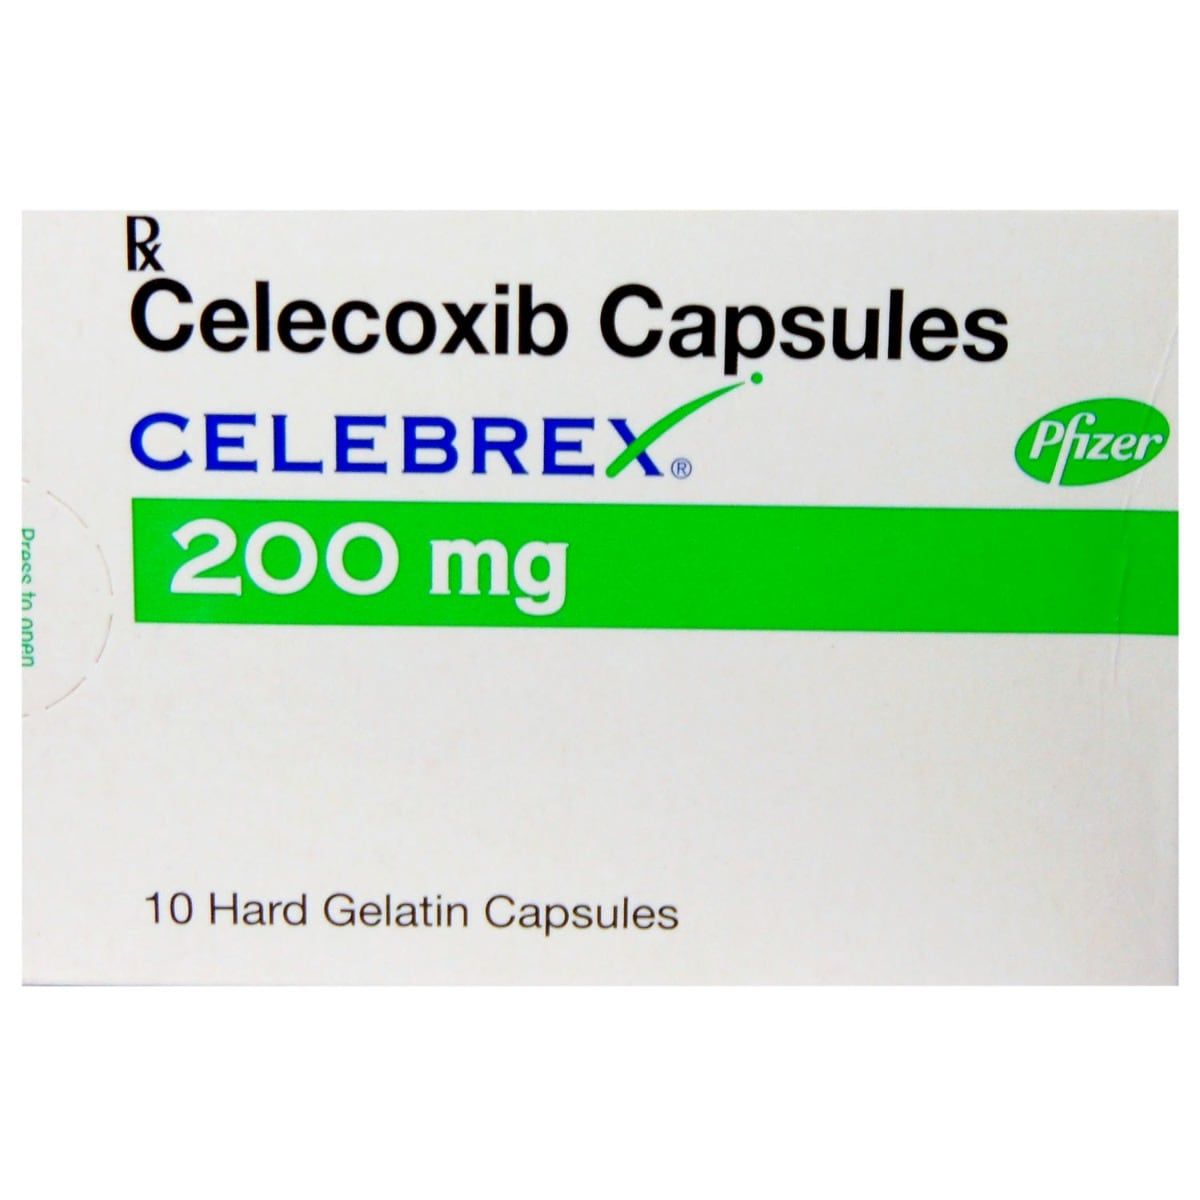 Celebrex 200 mg Capsule 10's Price, Uses, Side Effects, Composition